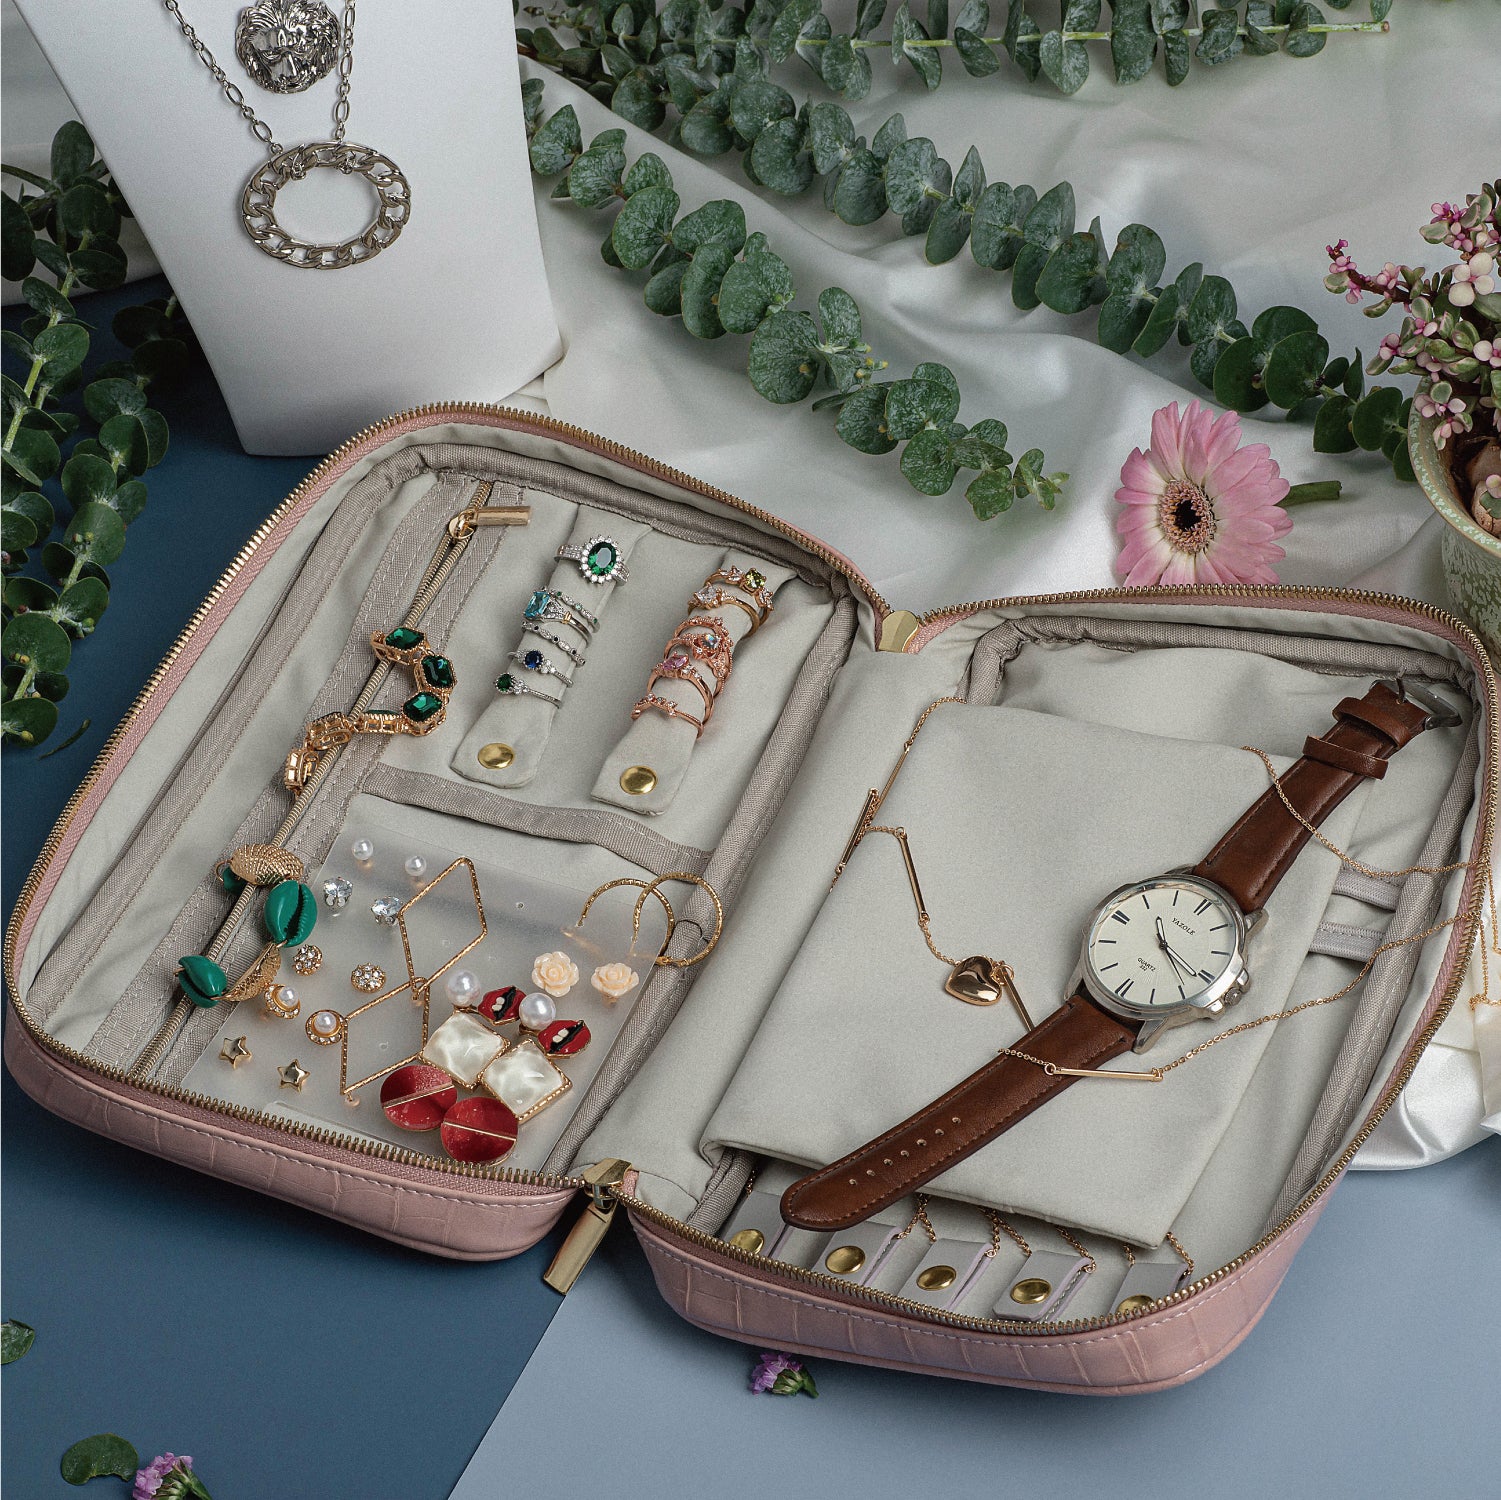 BAGSMART's Travel Jewelry Case on  Keeps Necklaces Tangle-Free –  StyleCaster